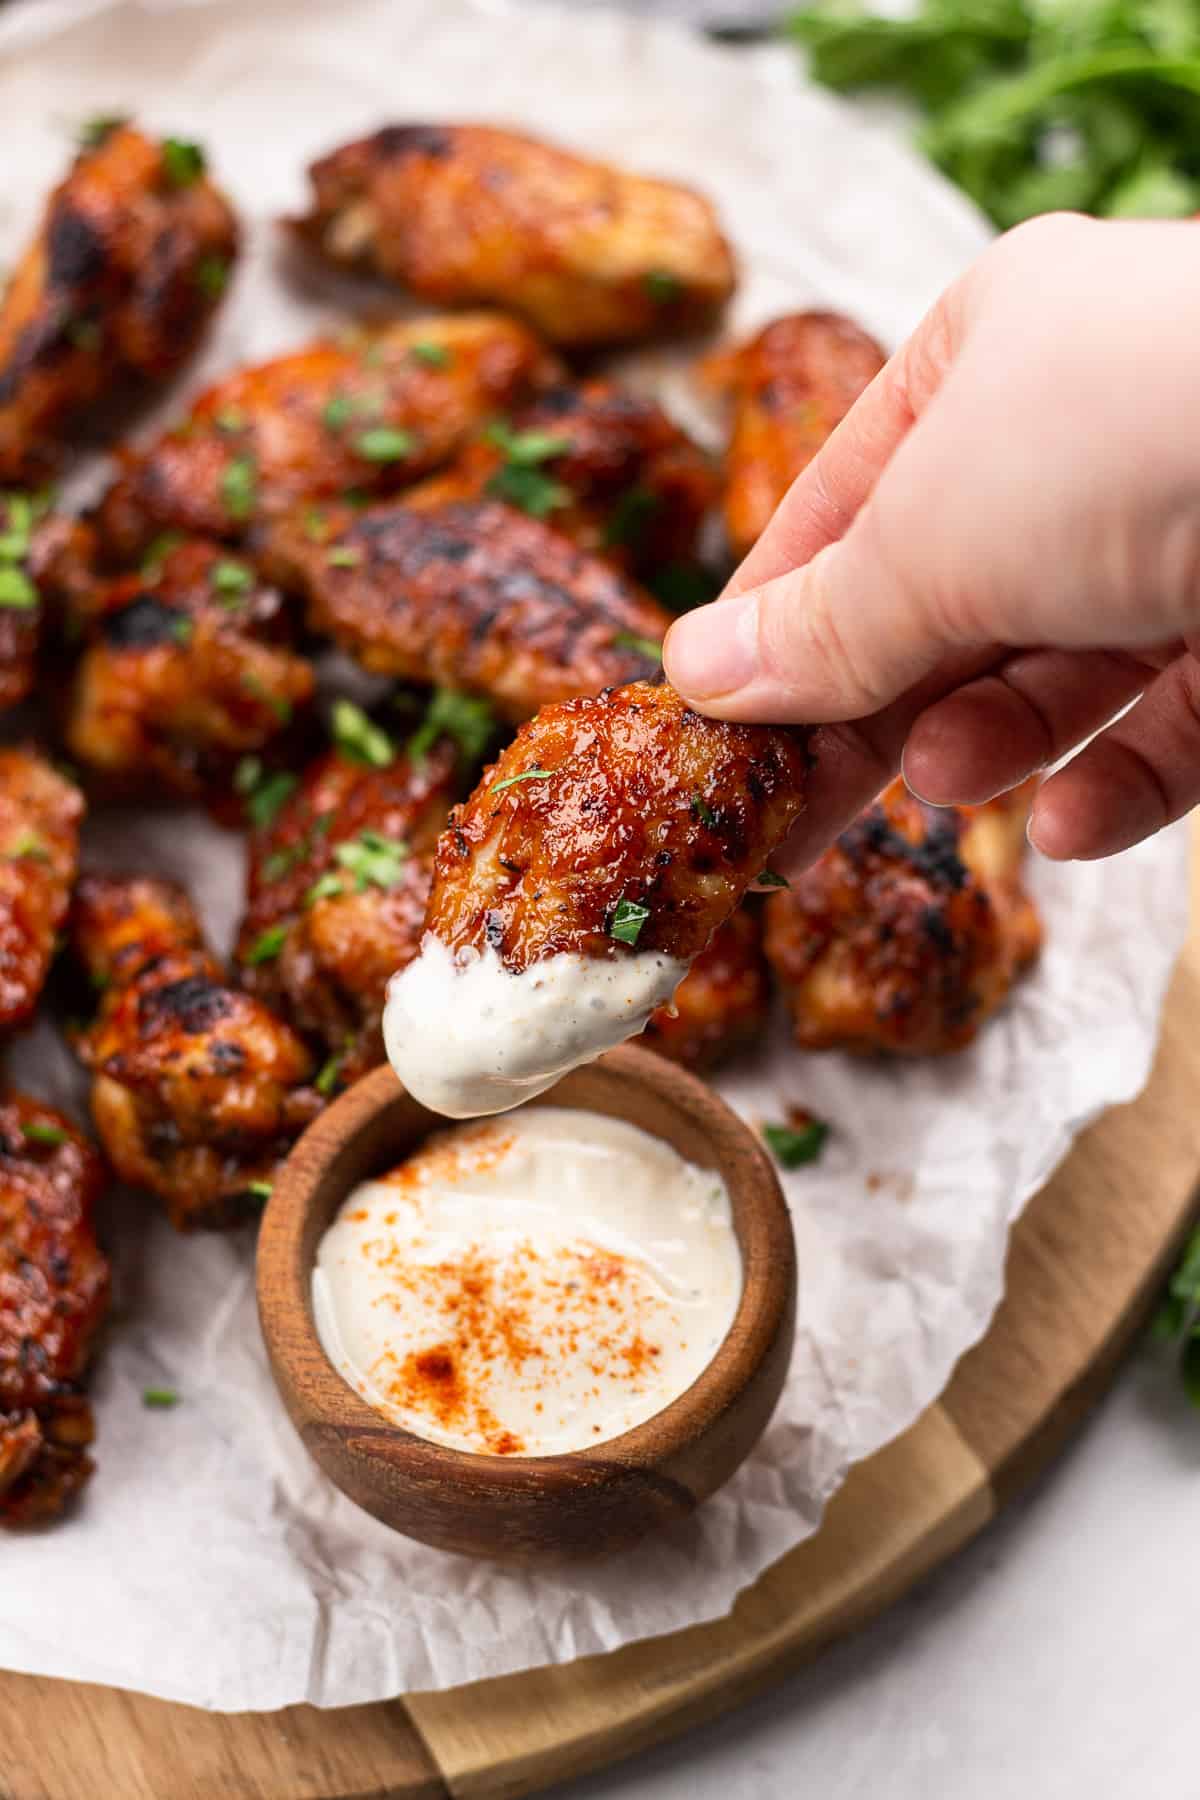 Dipping BBQ chicken wing in a ranch sauce.